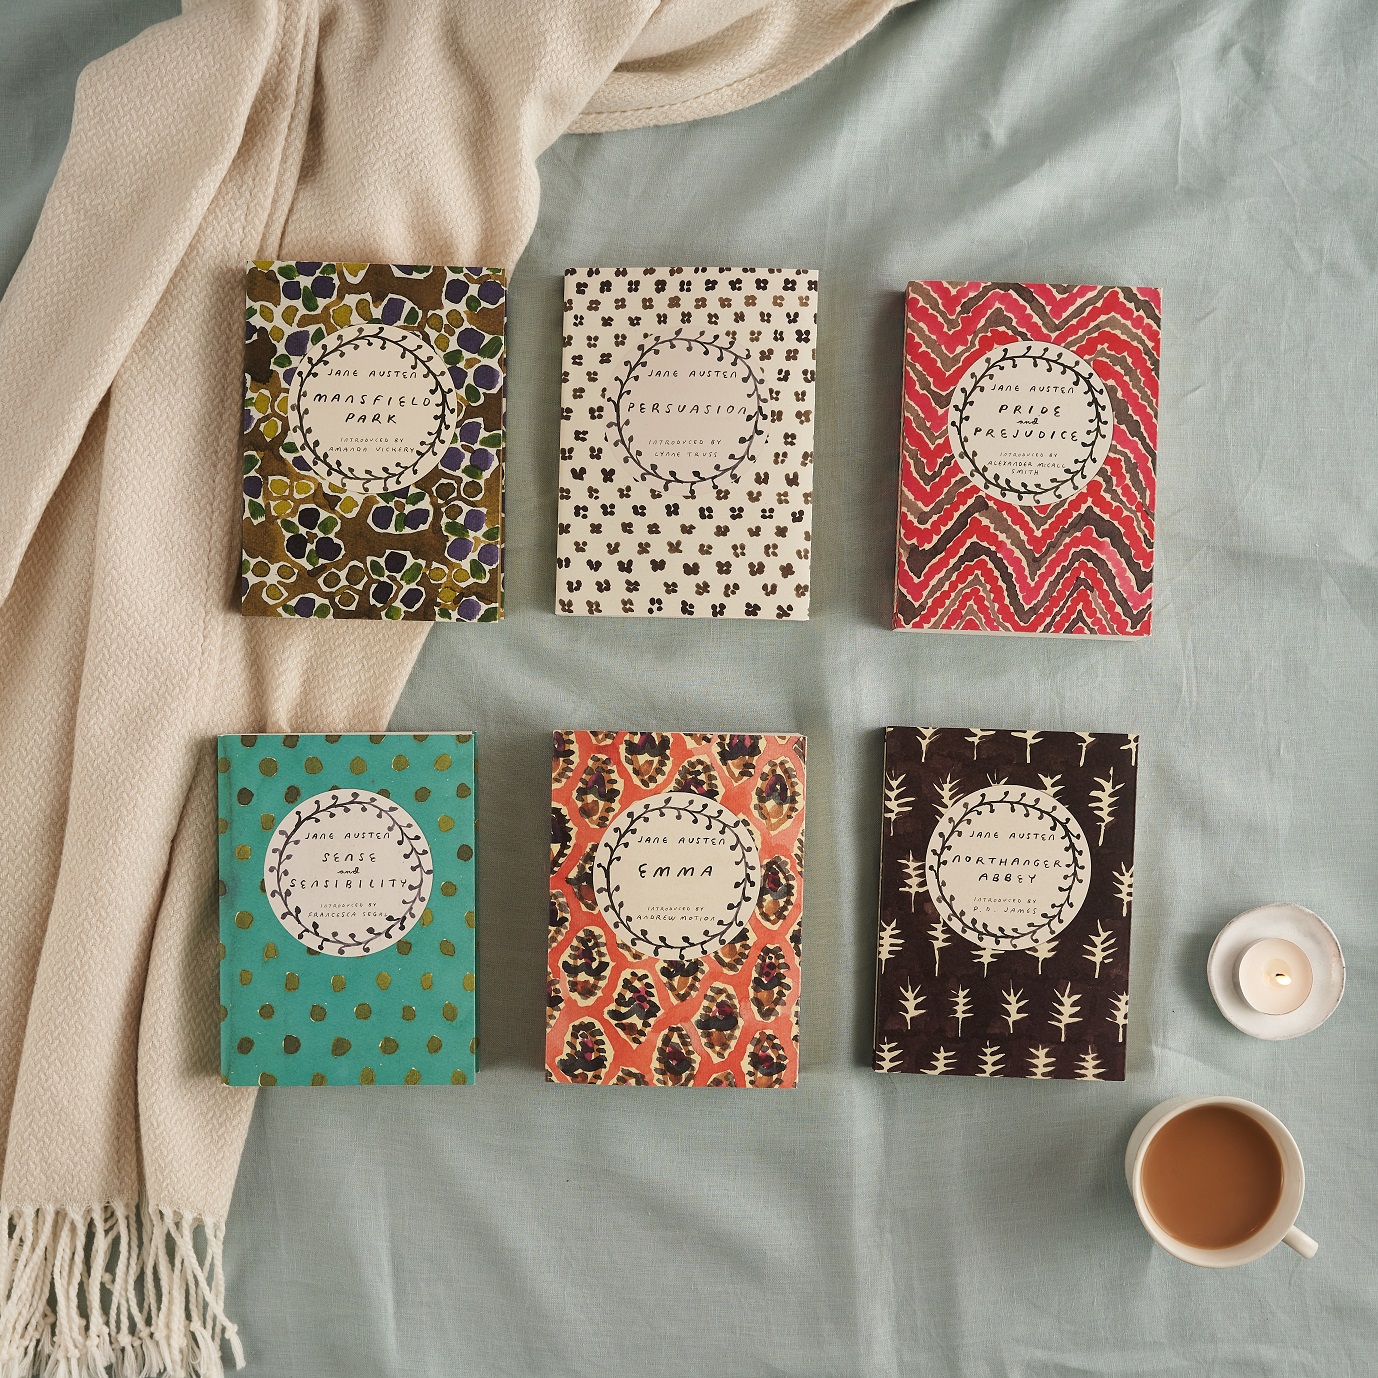 Jane Austen novels with colourful covers